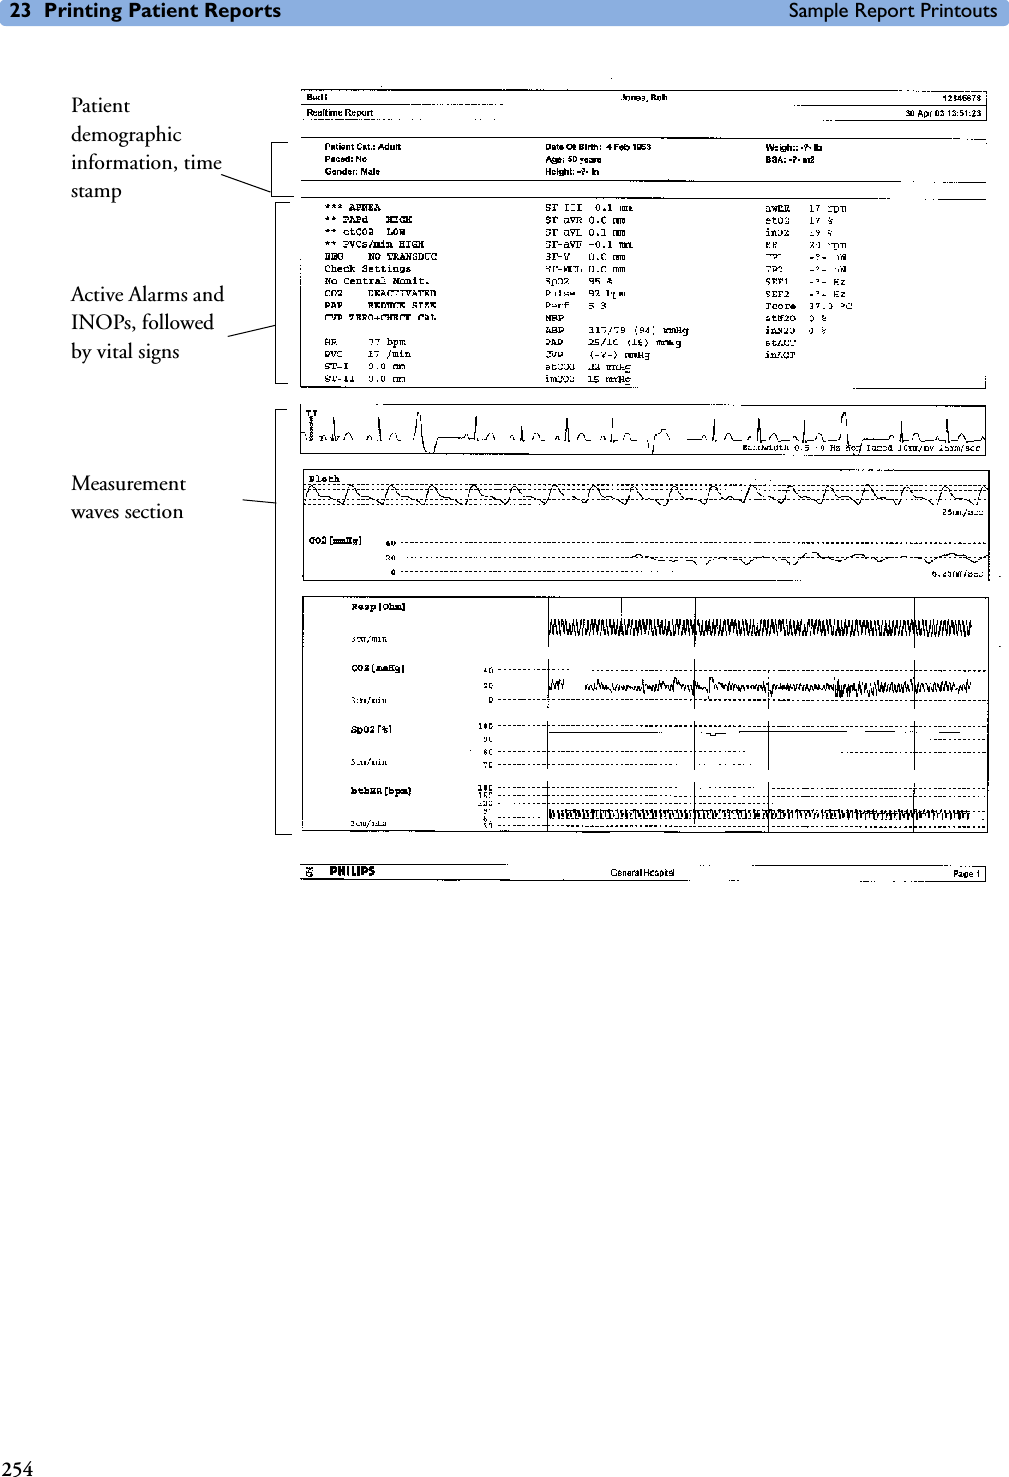 23 Printing Patient Reports Sample Report Printouts254Patient demographic information, time stampActive Alarms and INOPs, followed by vital signsMeasurement waves section 